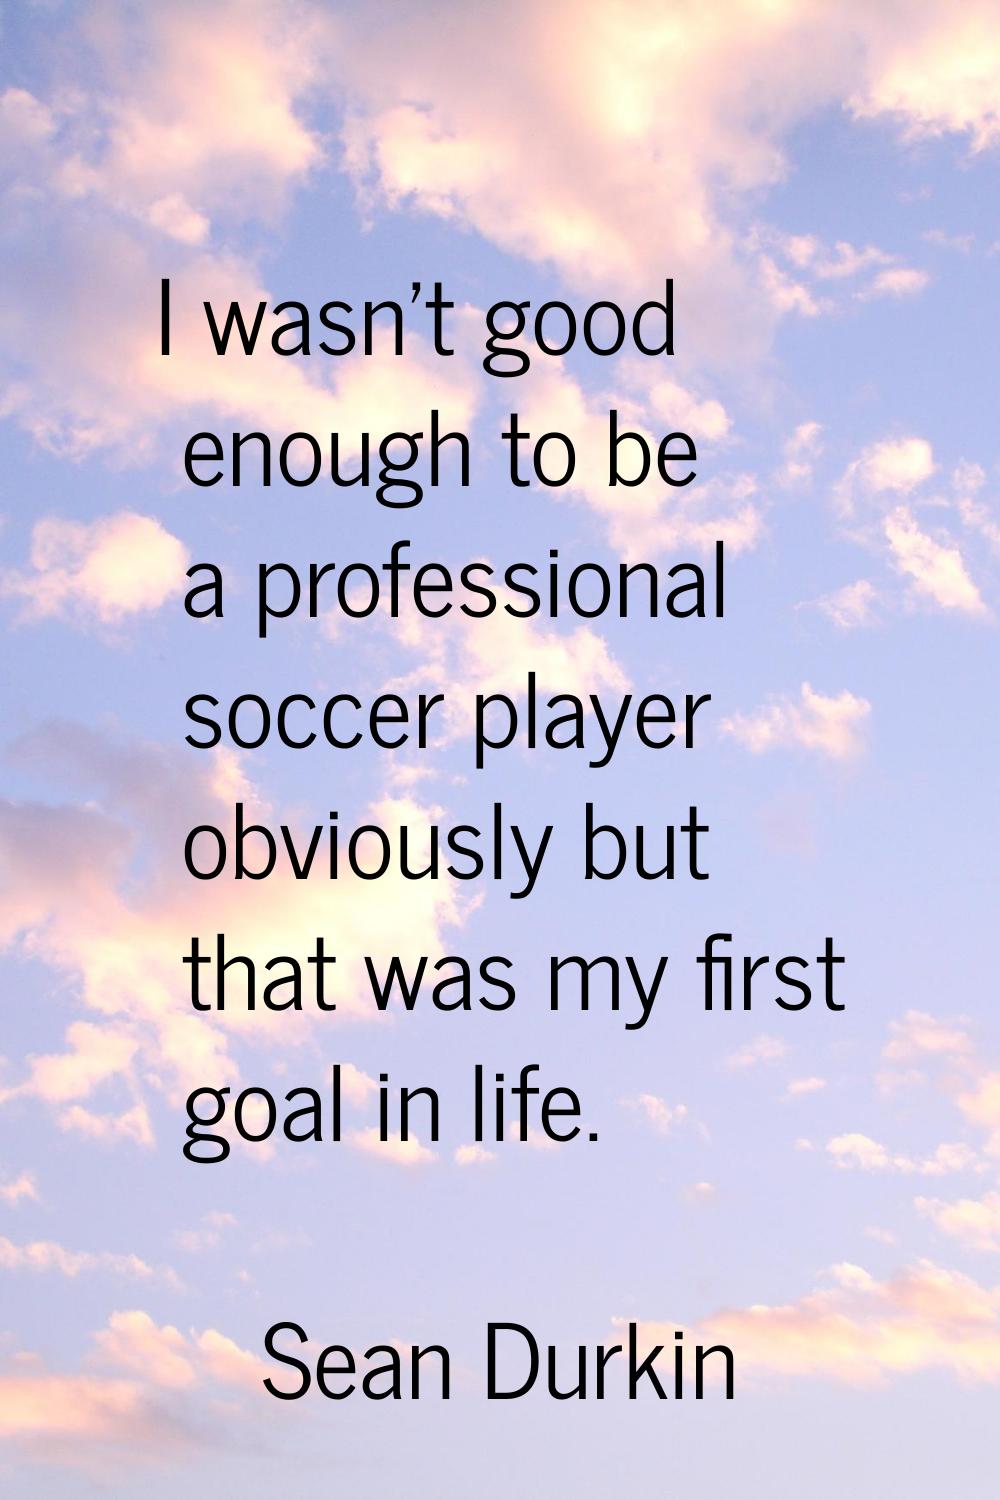 I wasn't good enough to be a professional soccer player obviously but that was my first goal in lif